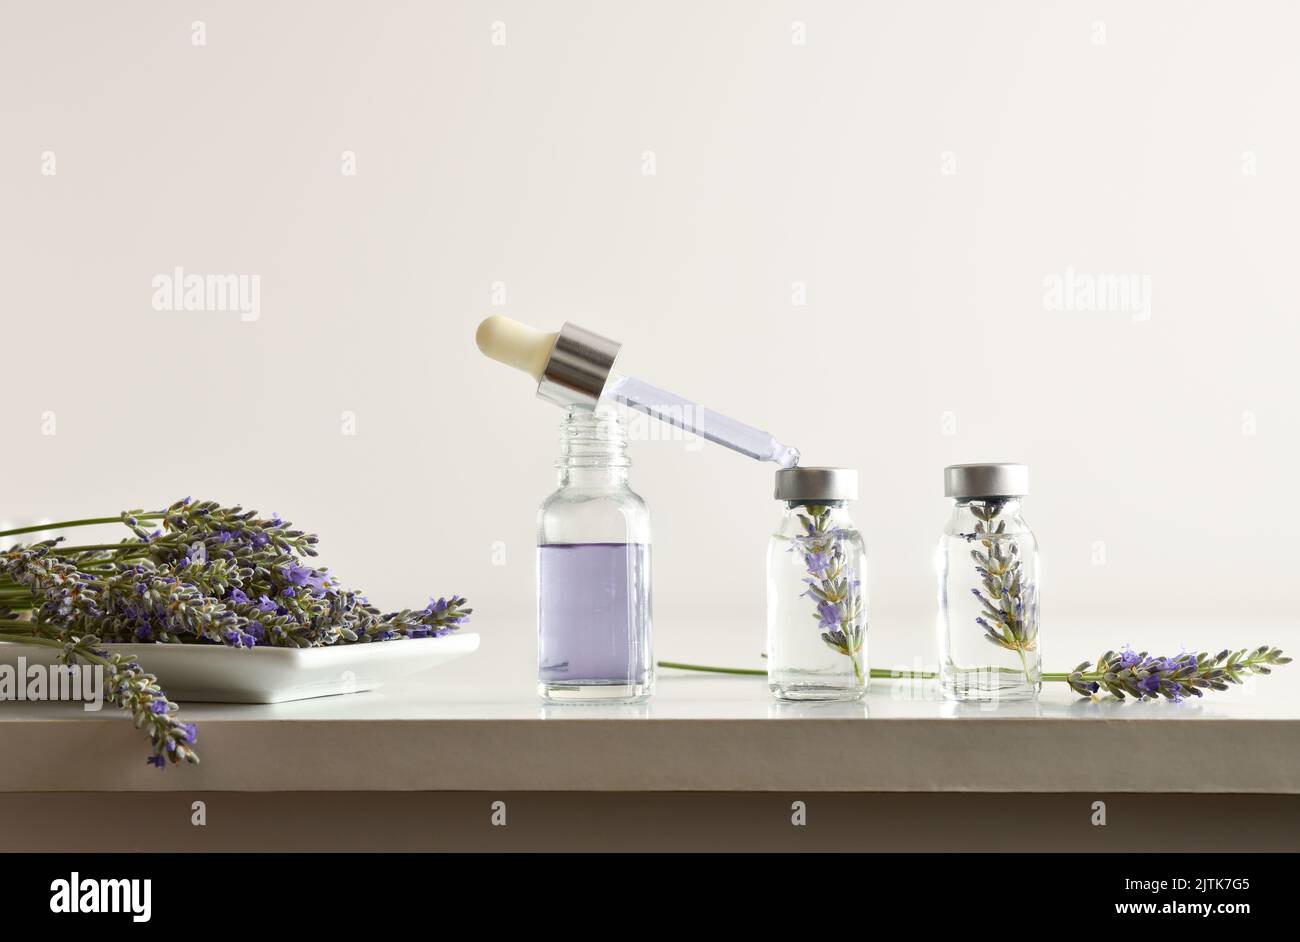 Vials with lavender essence preparation on a white laboratory bench and white isolated background. Front view. Horizontal composition. Stock Photo